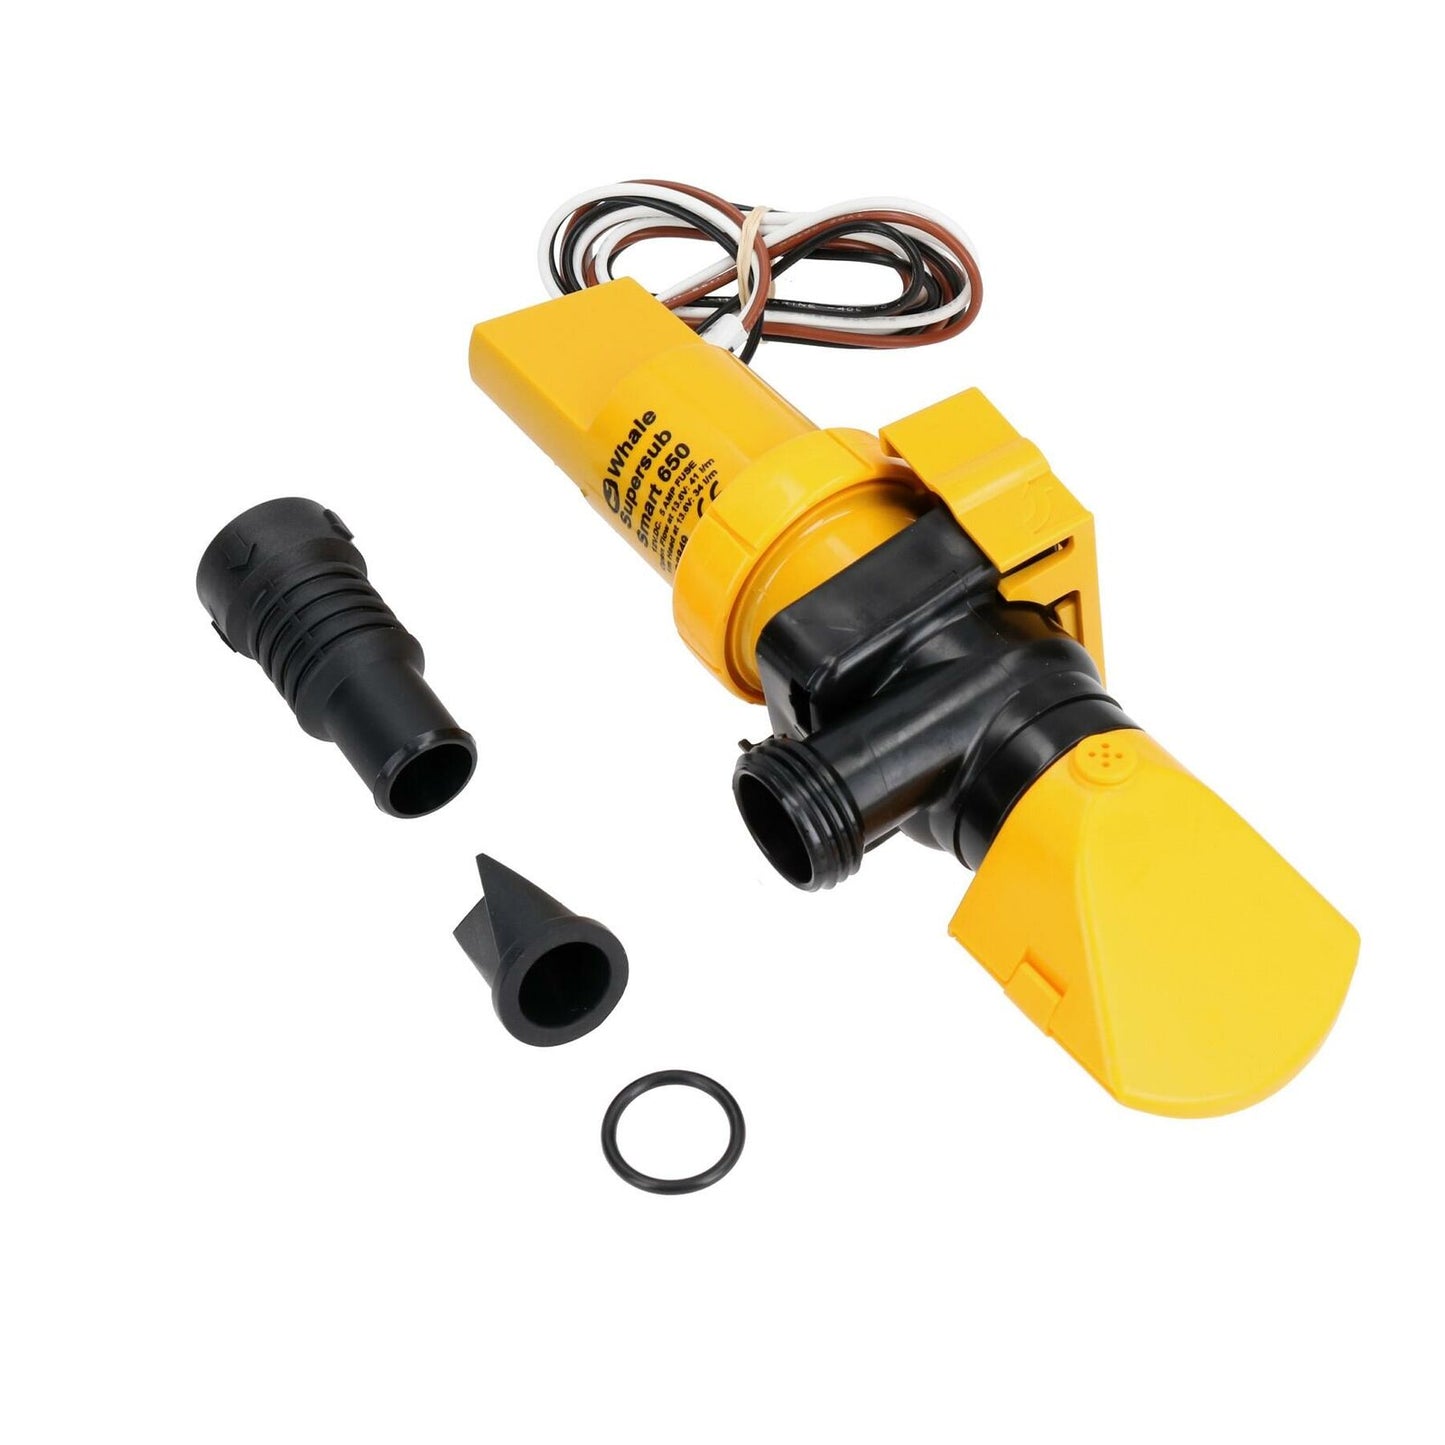 Whale Supersub Smart 650 Bilge Pump Automatic with Electronic Float Switch 12v